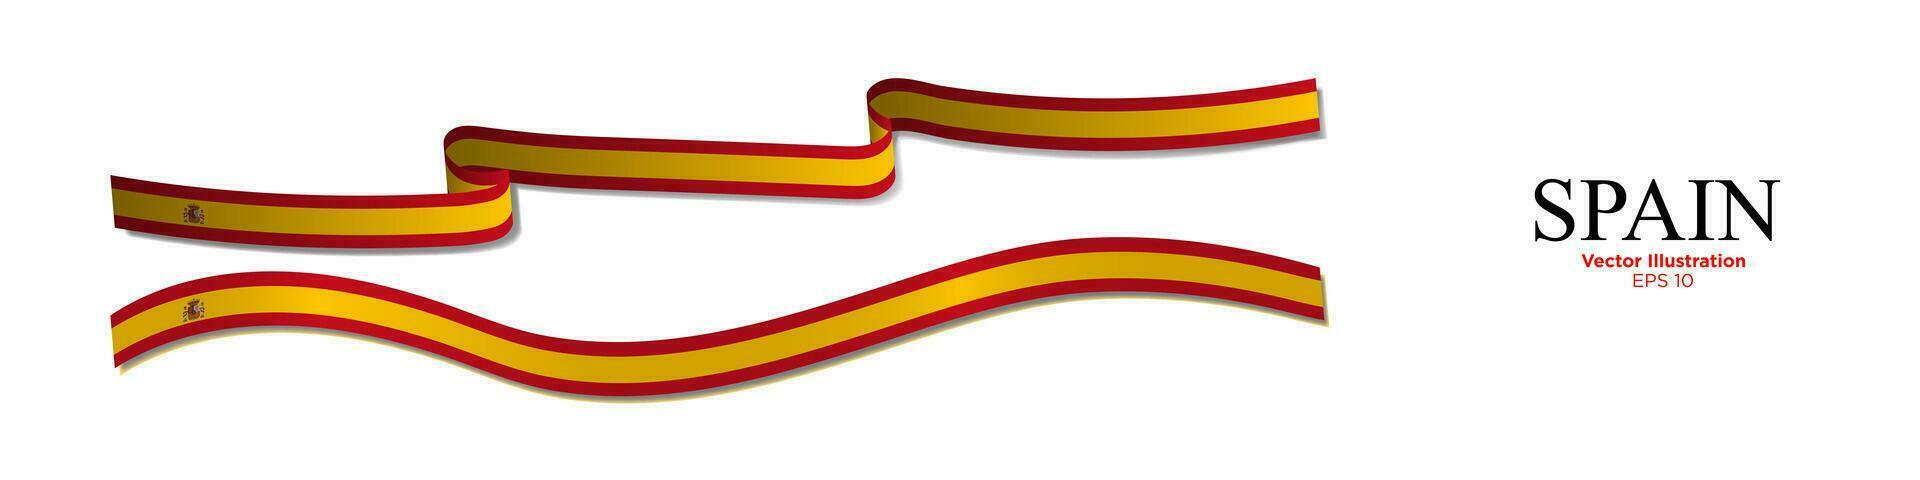 3d Rendered Spanish Flag Ribbons with shadows. Long Flag of Kingdom of Spain Set. Curled and rendered in perspective. Graphic Resource. Editable Vector Illustration.